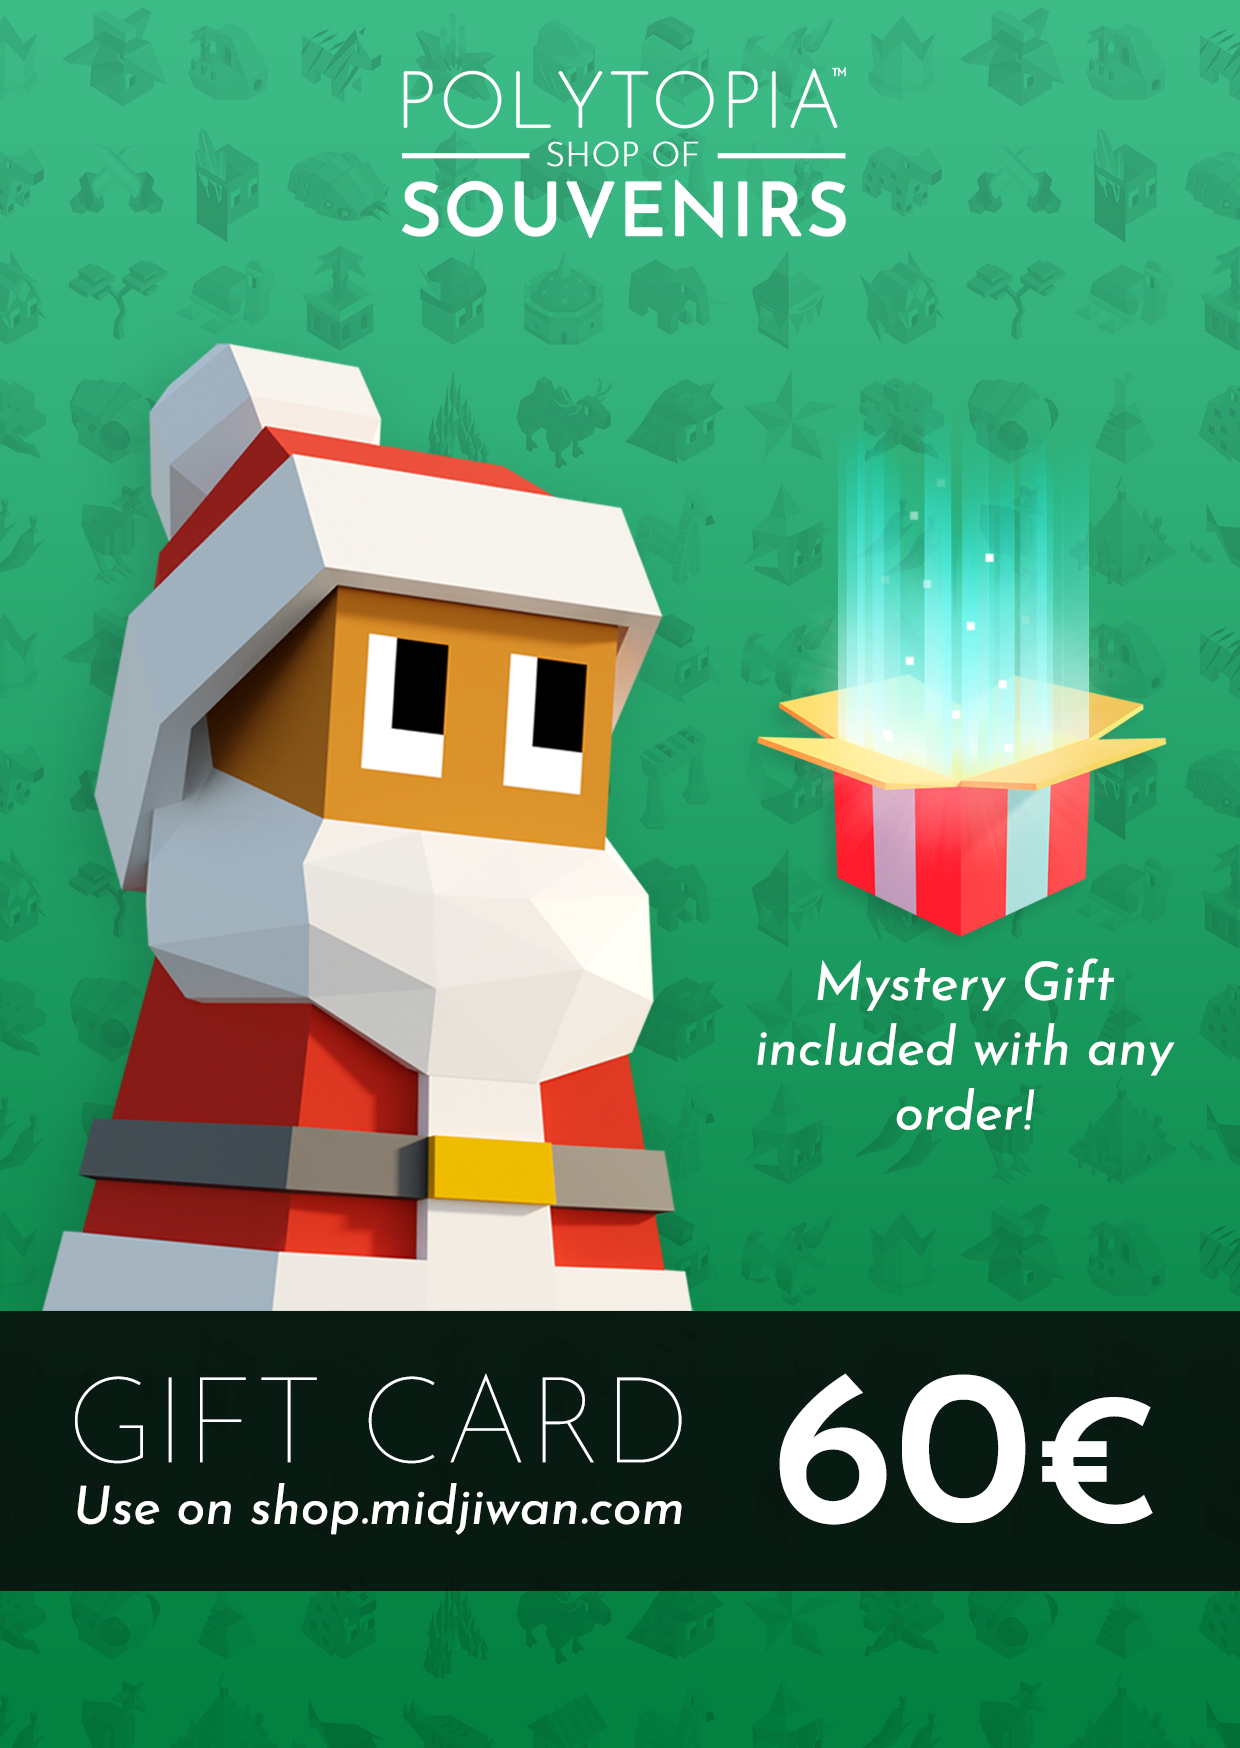 Gift Card + Mystery Gift!